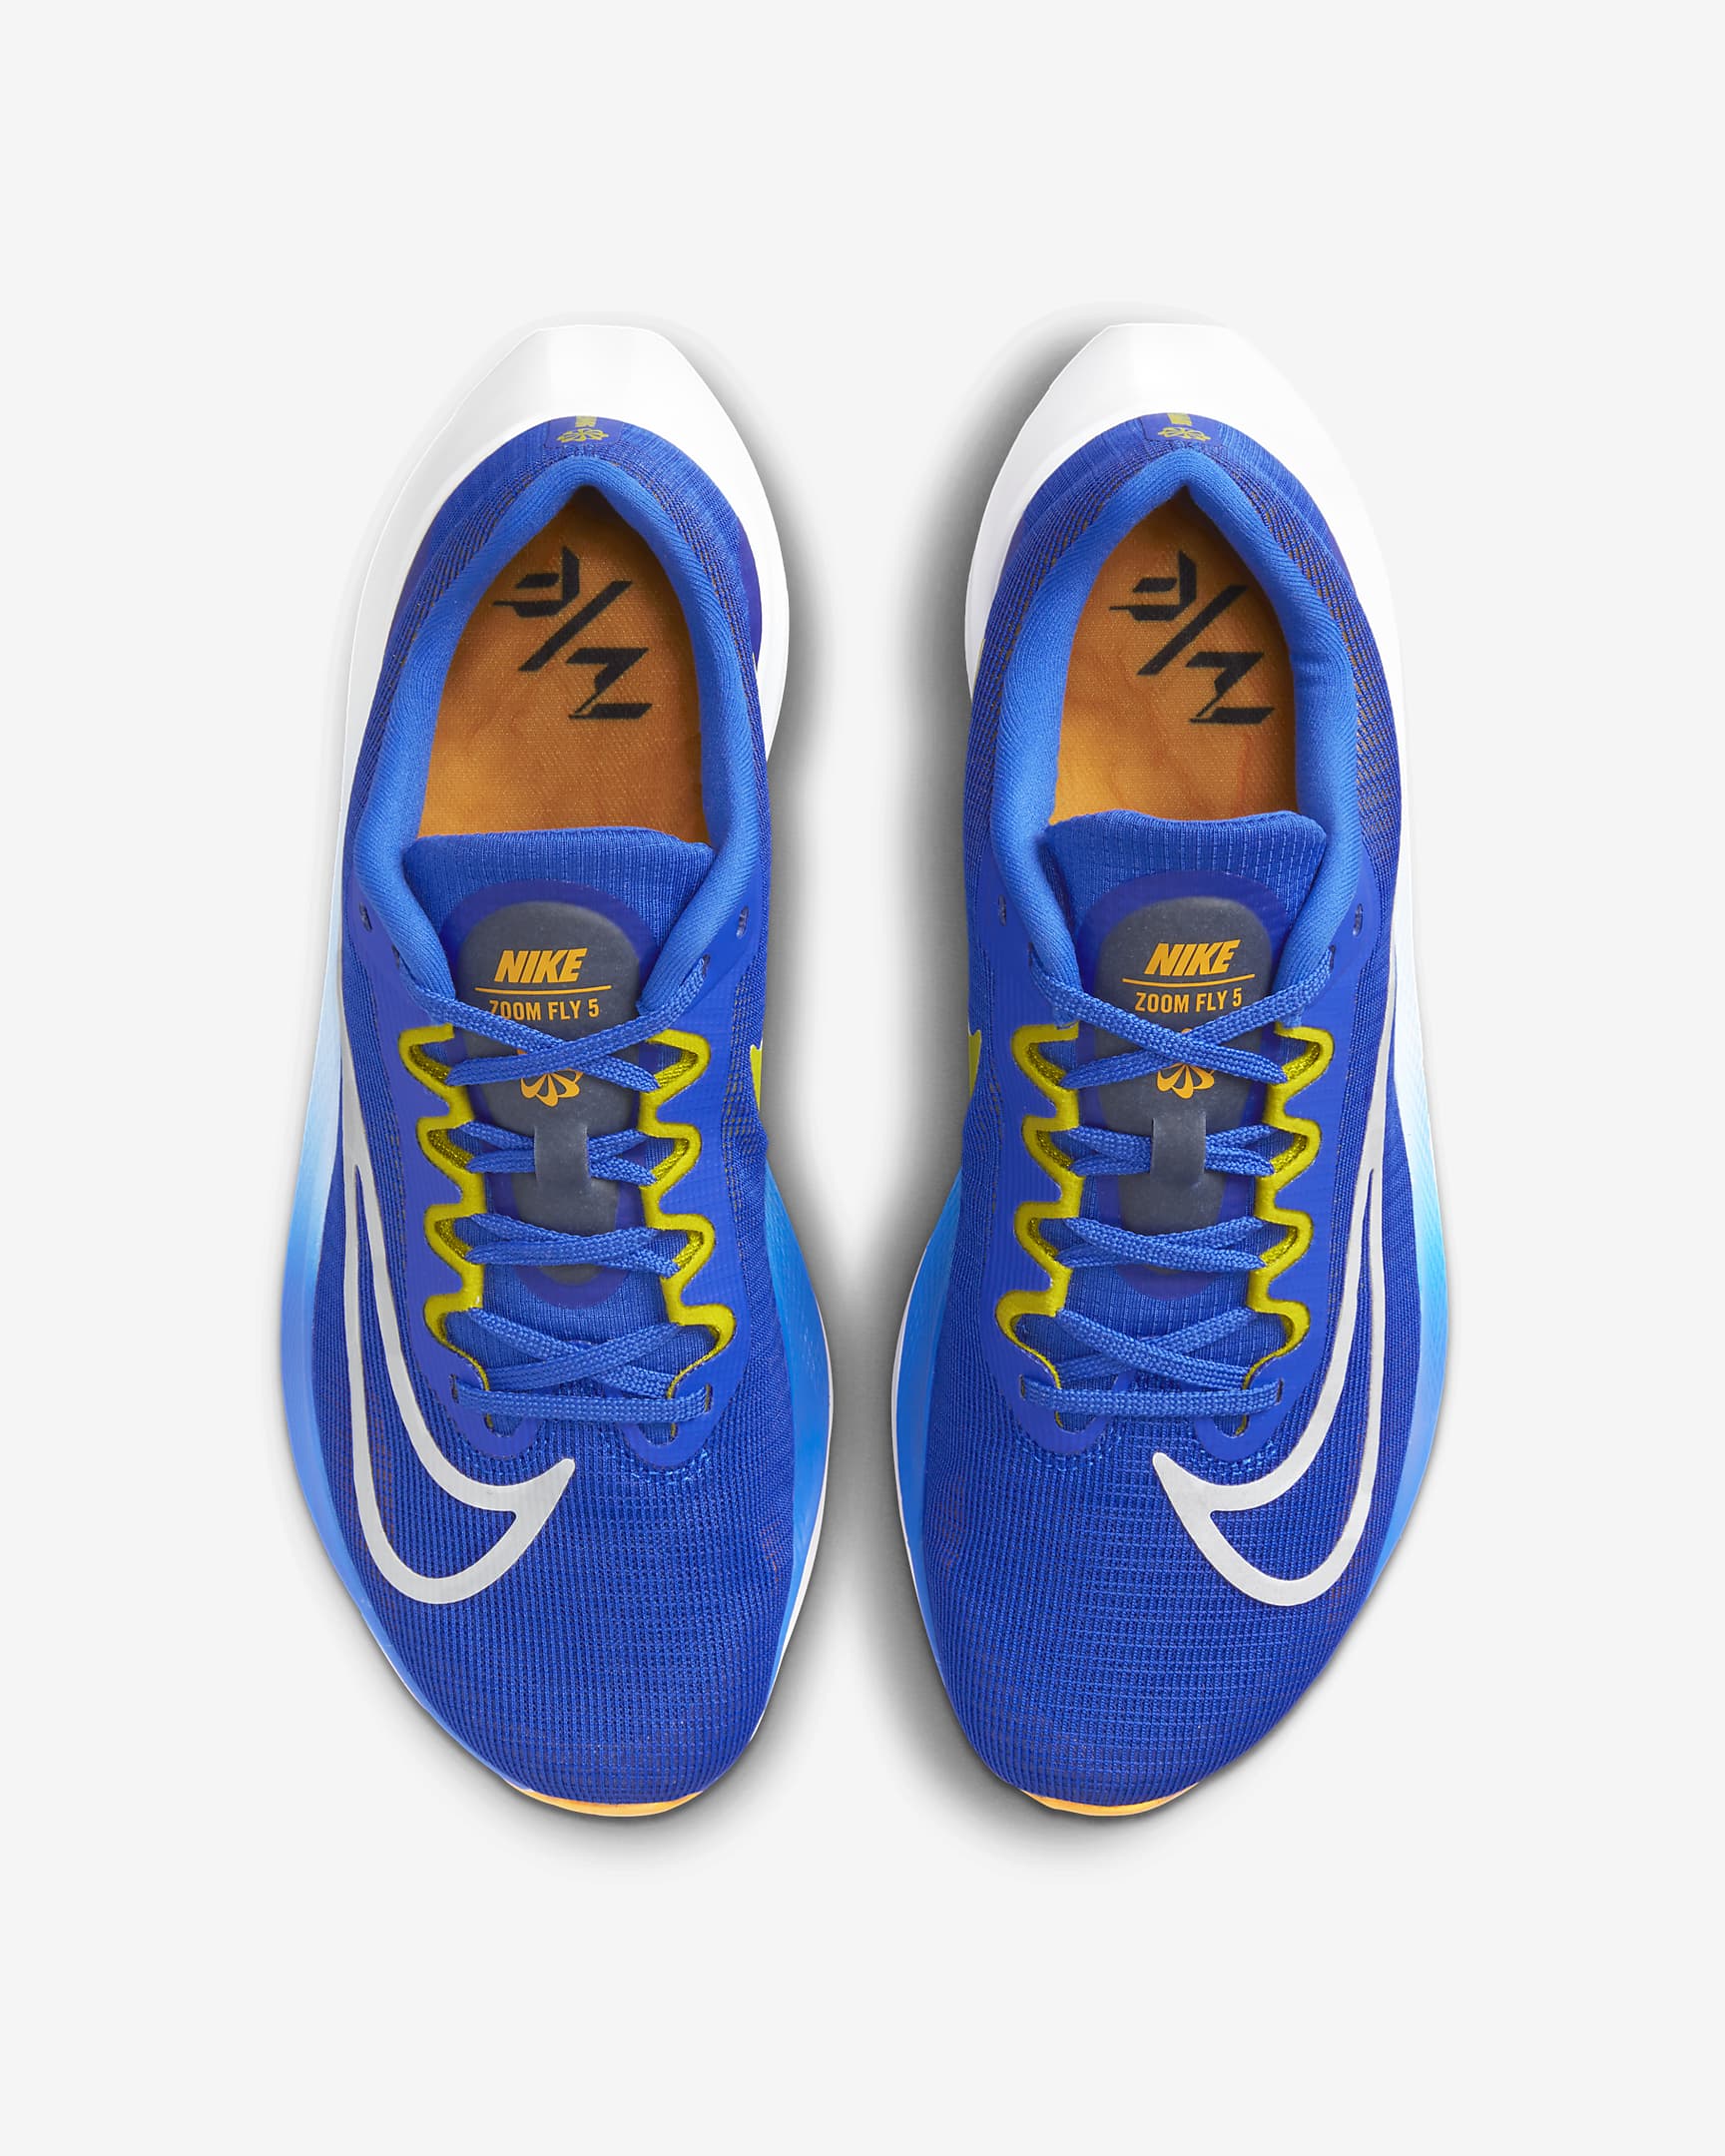 nike zoom fly 5 men's road running shoes